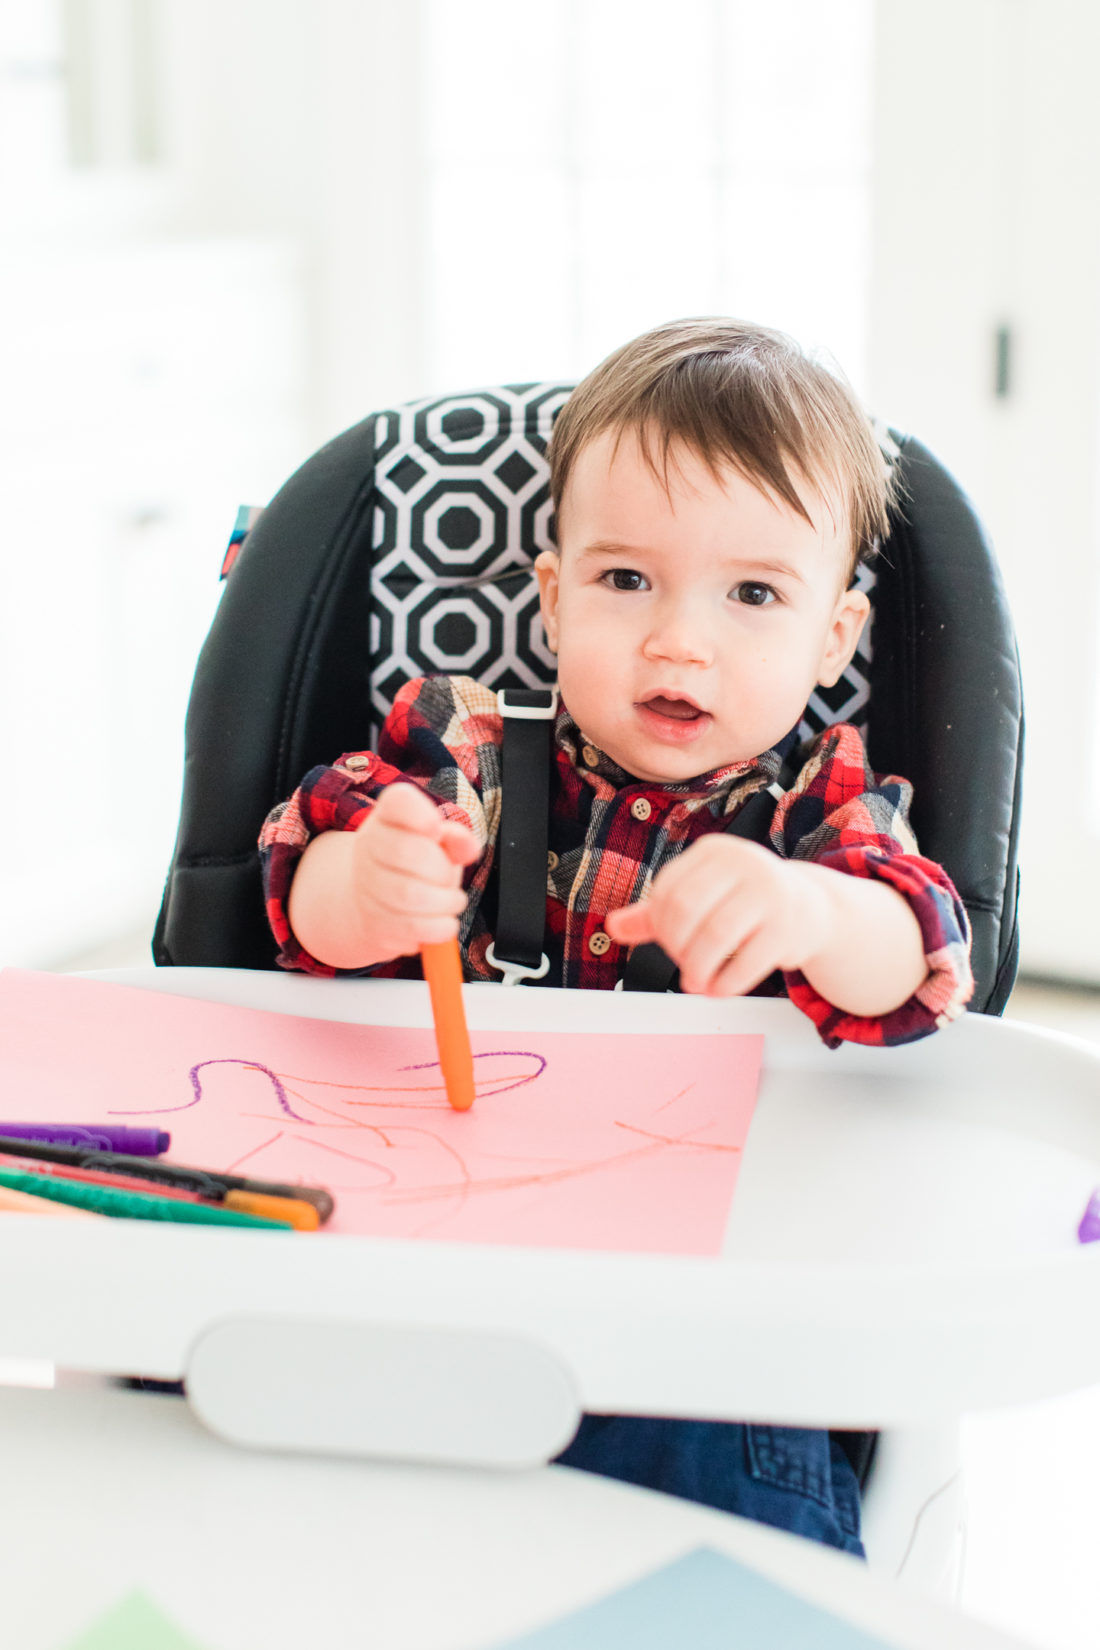 Major Martino crafts homemade Valentine's Day cards with his Mom and sister